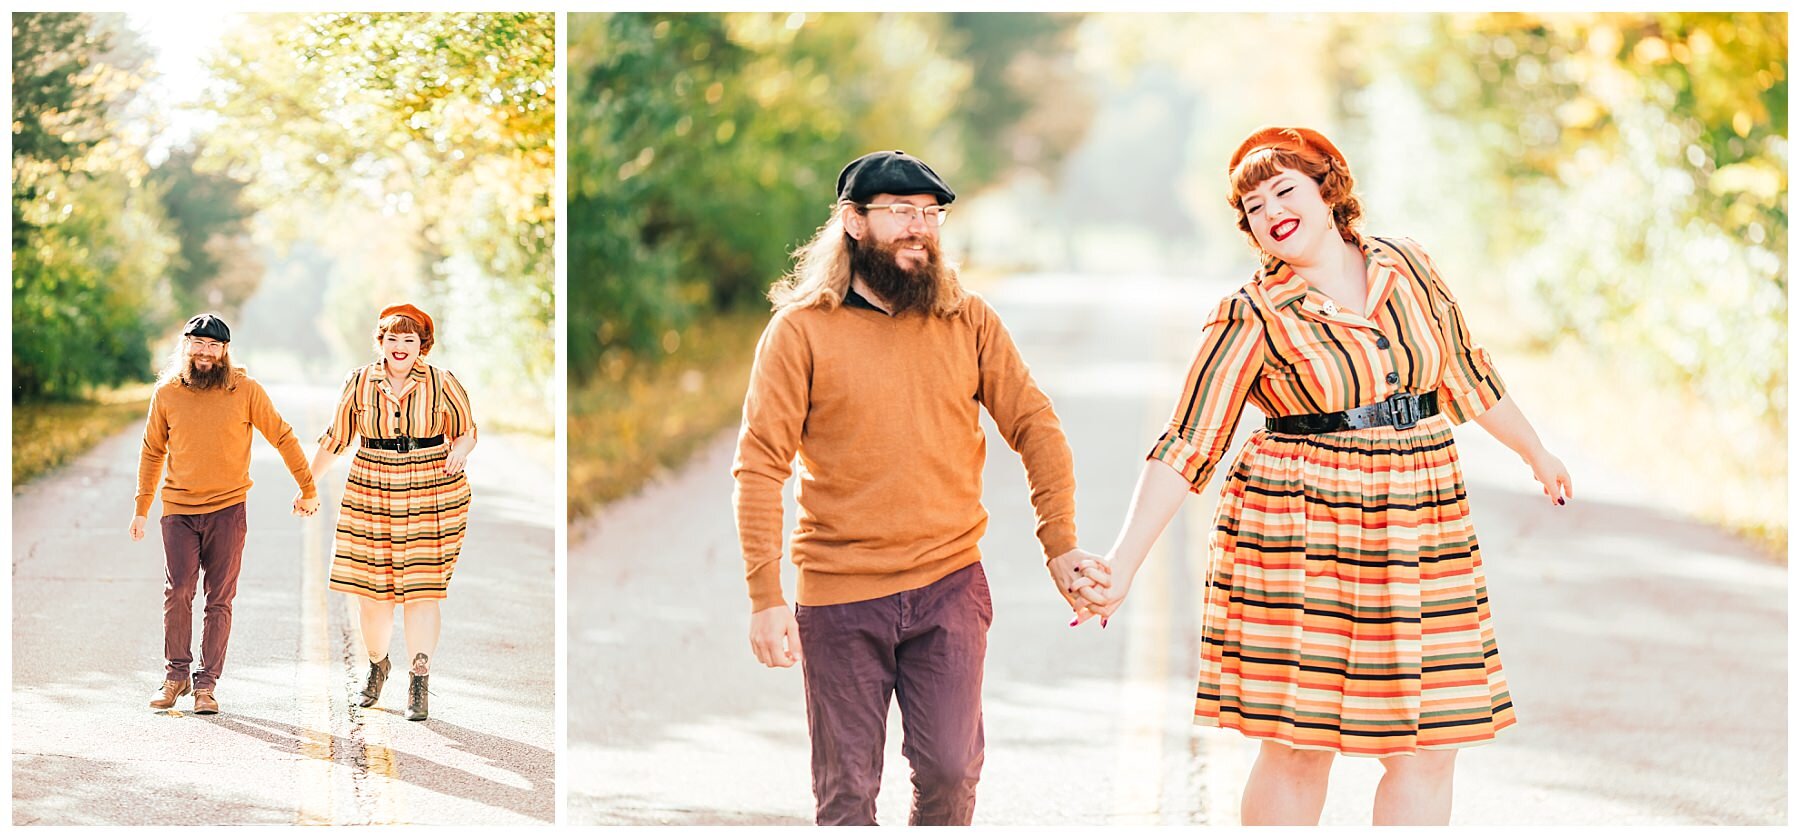 pinup couple walking down the road in the fall